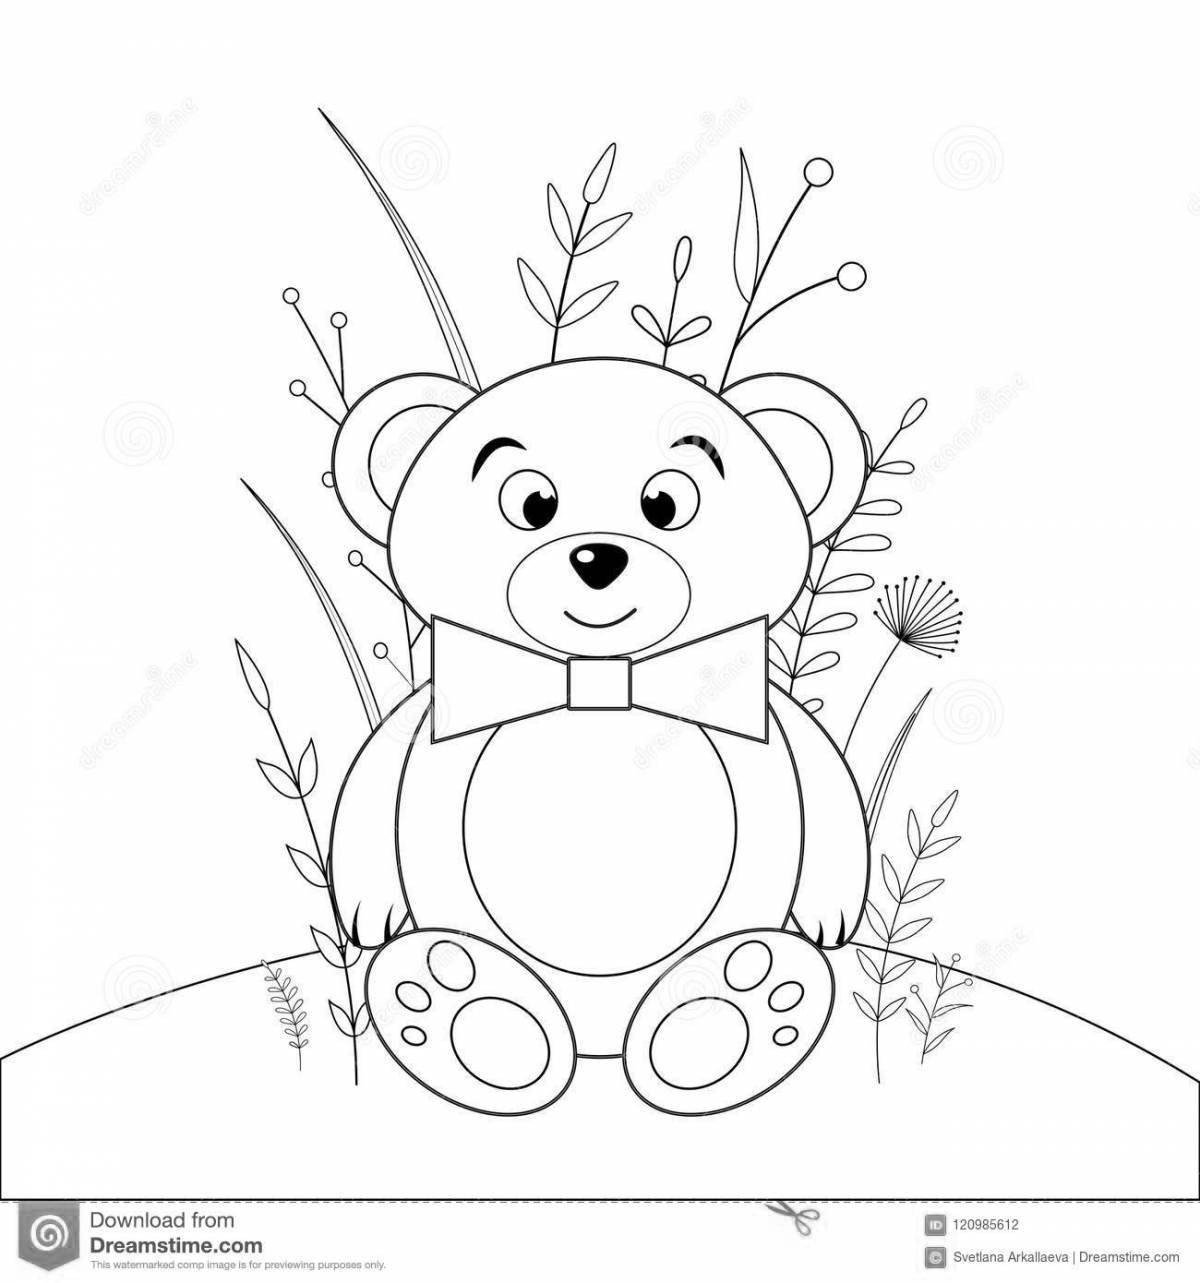 Children's coloring olympic teddy bear